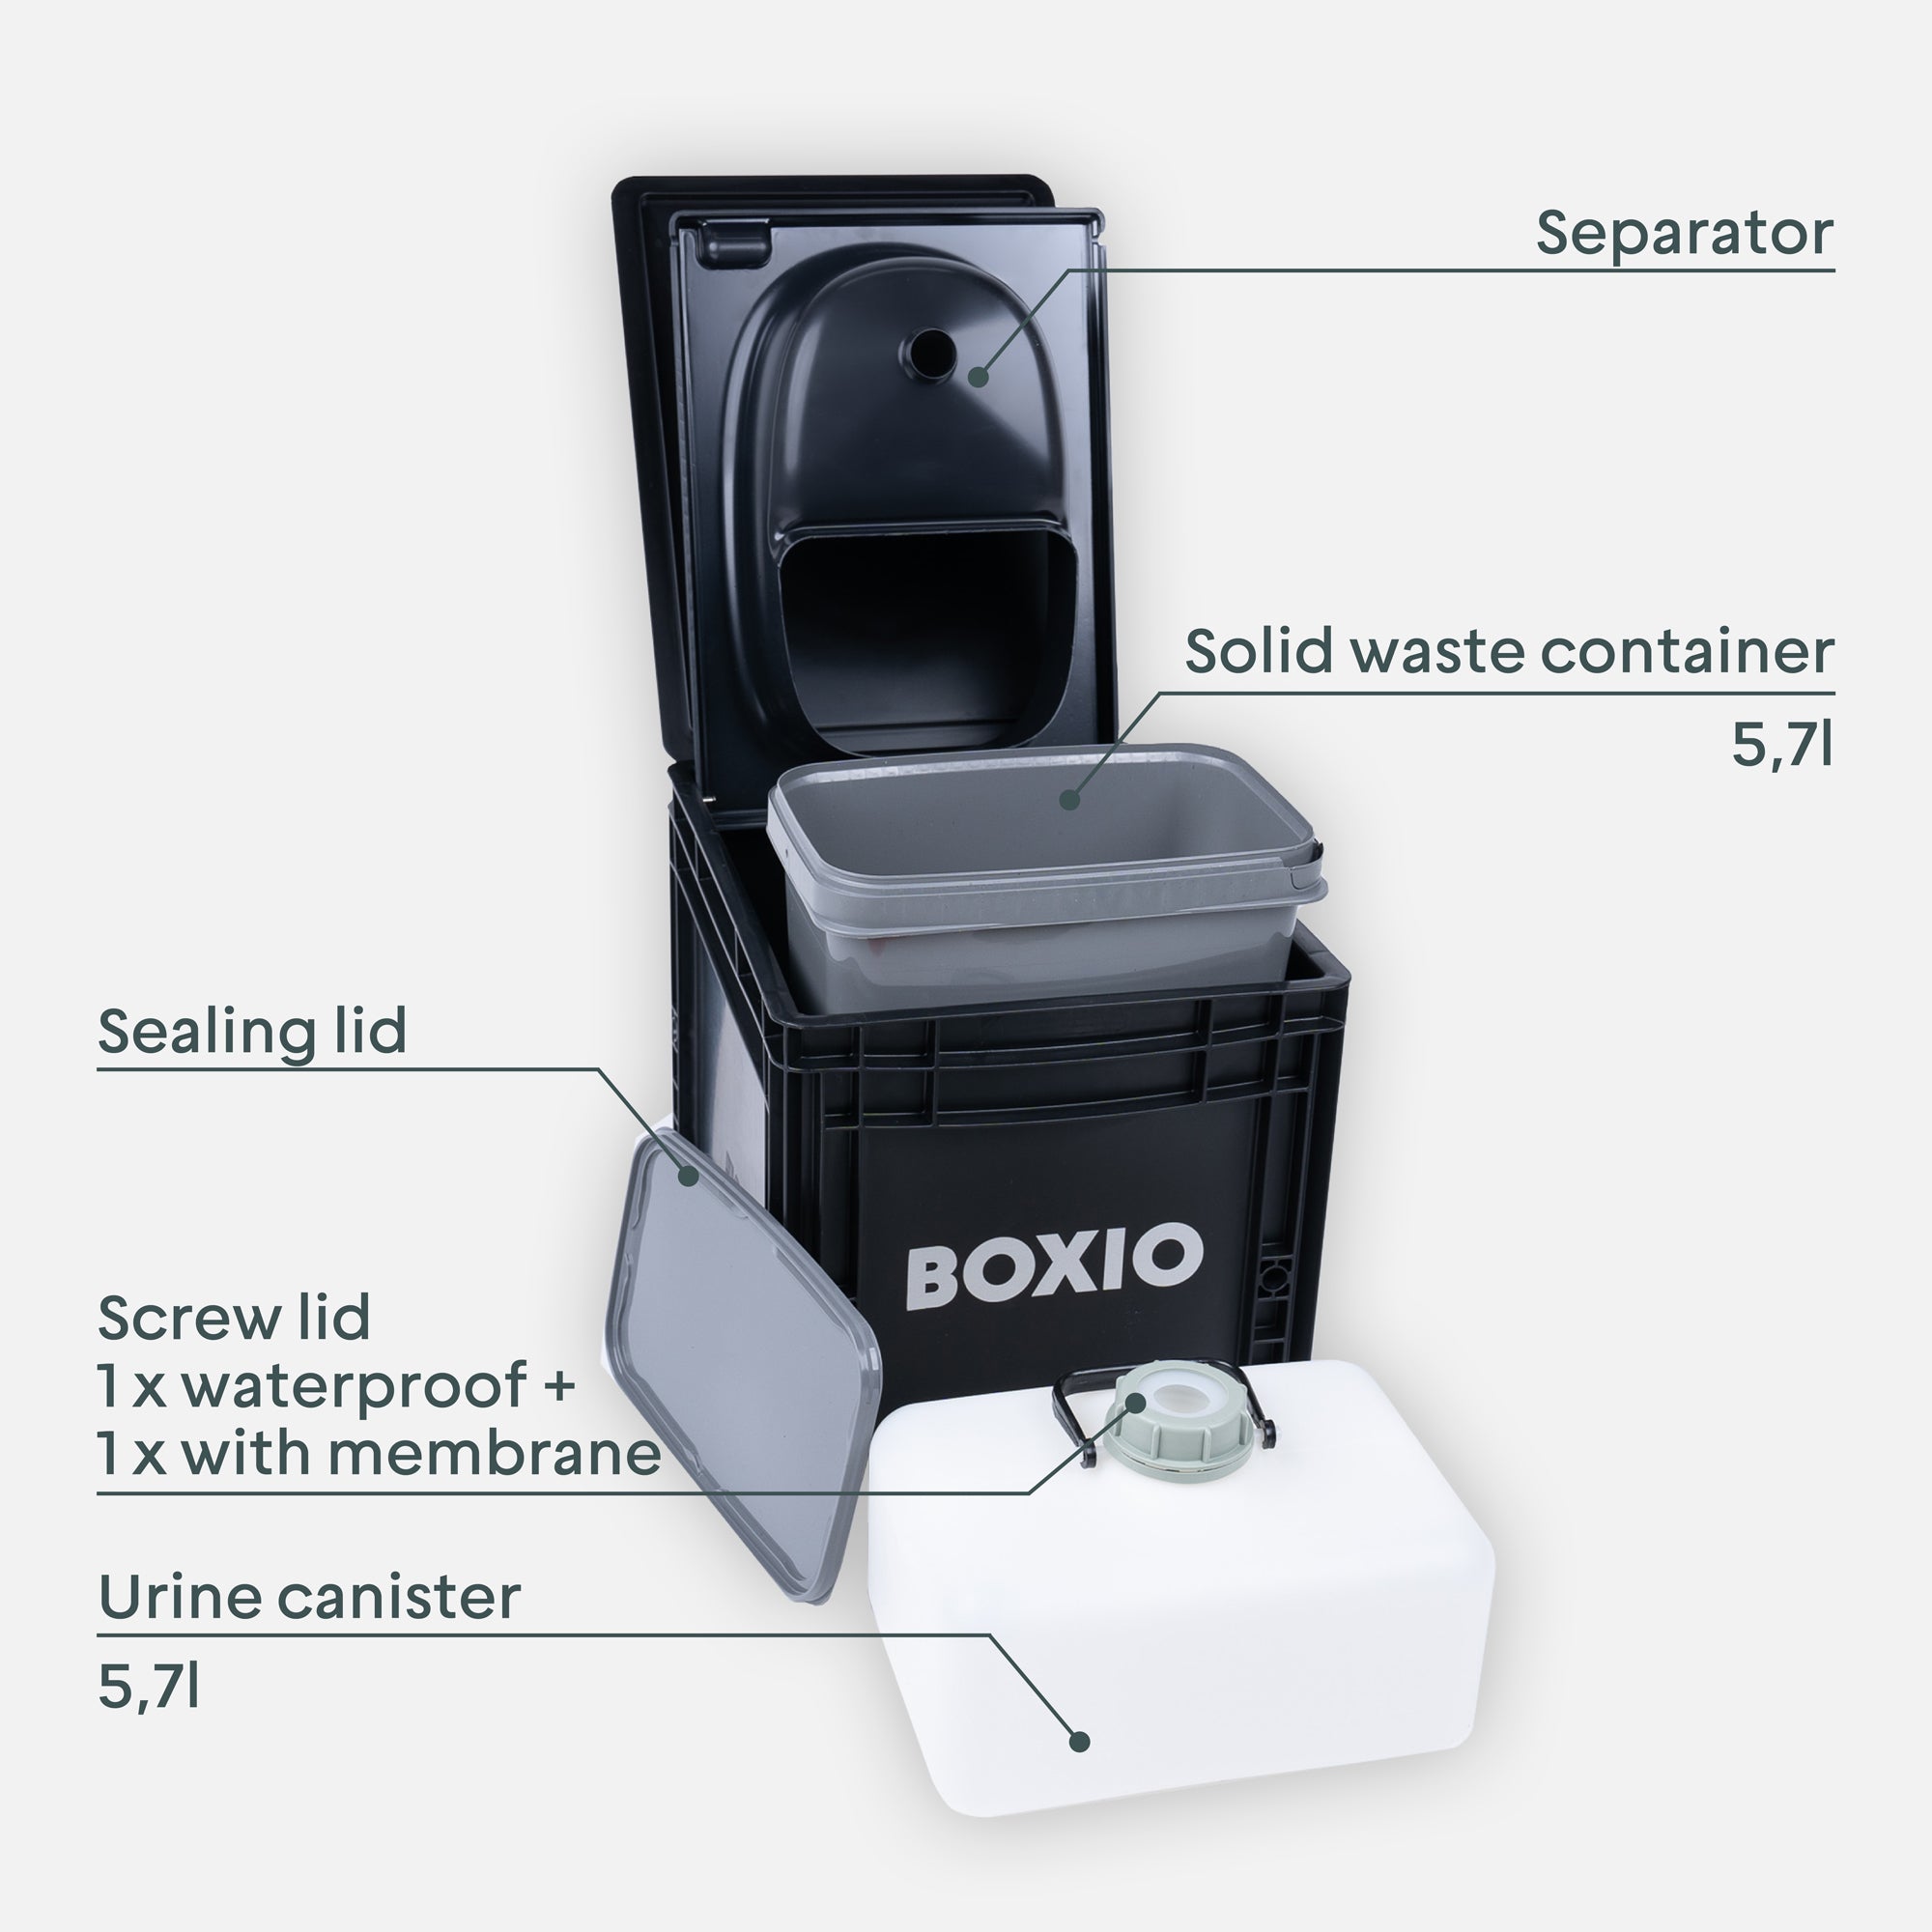 BOXIO Toilet UP: Booster Seat for Separating Toilet - Includes Hemp Litter  and Practical Shaker - 15.7 x 11.8 x 4.7 cm